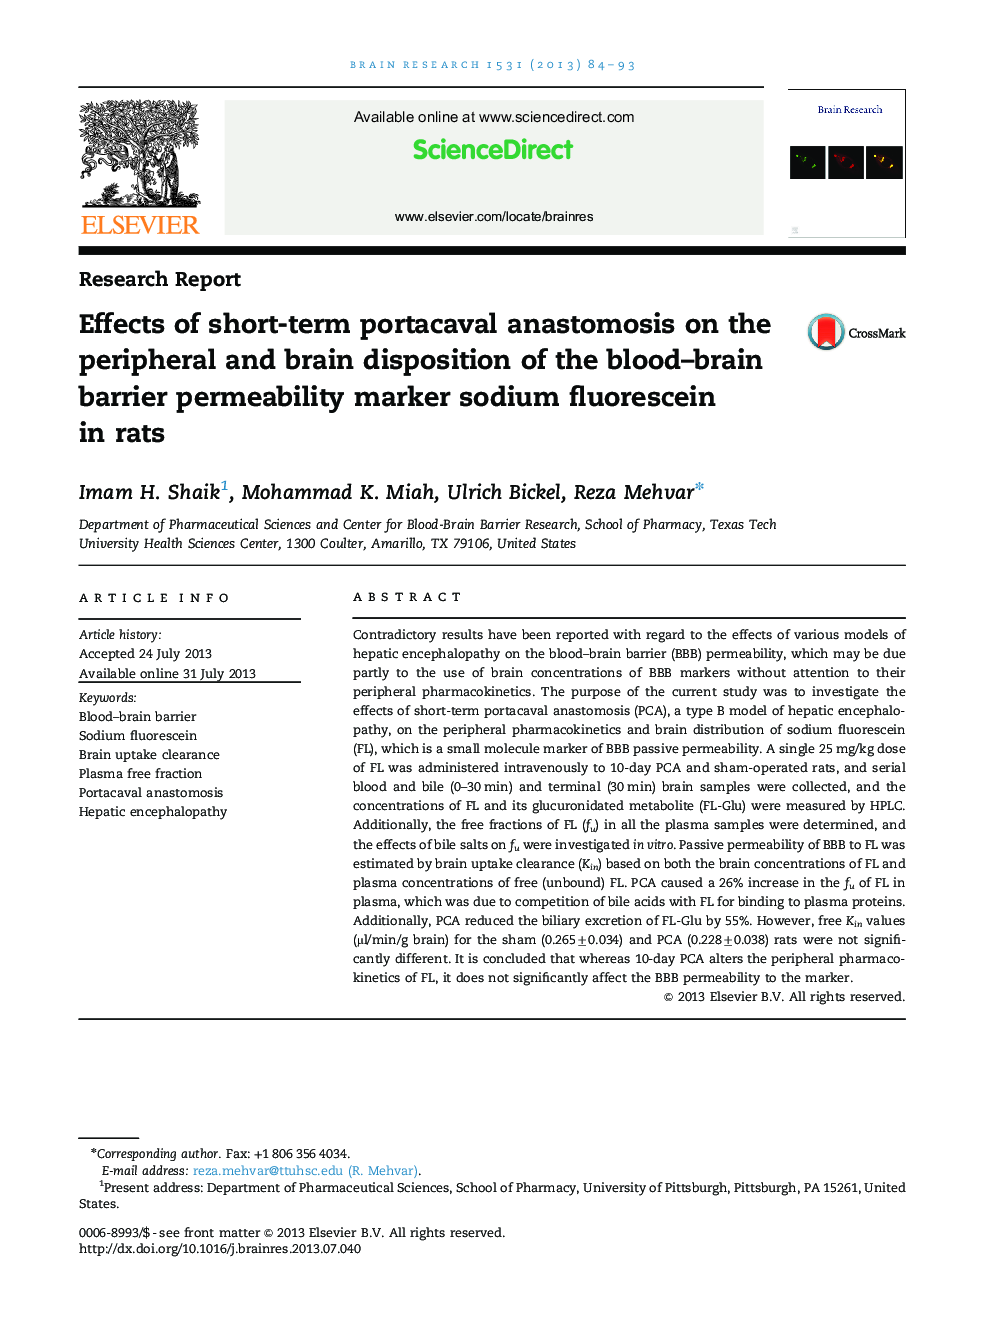 Research ReportEffects of short-term portacaval anastomosis on the peripheral and brain disposition of the blood-brain barrier permeability marker sodium fluorescein in rats